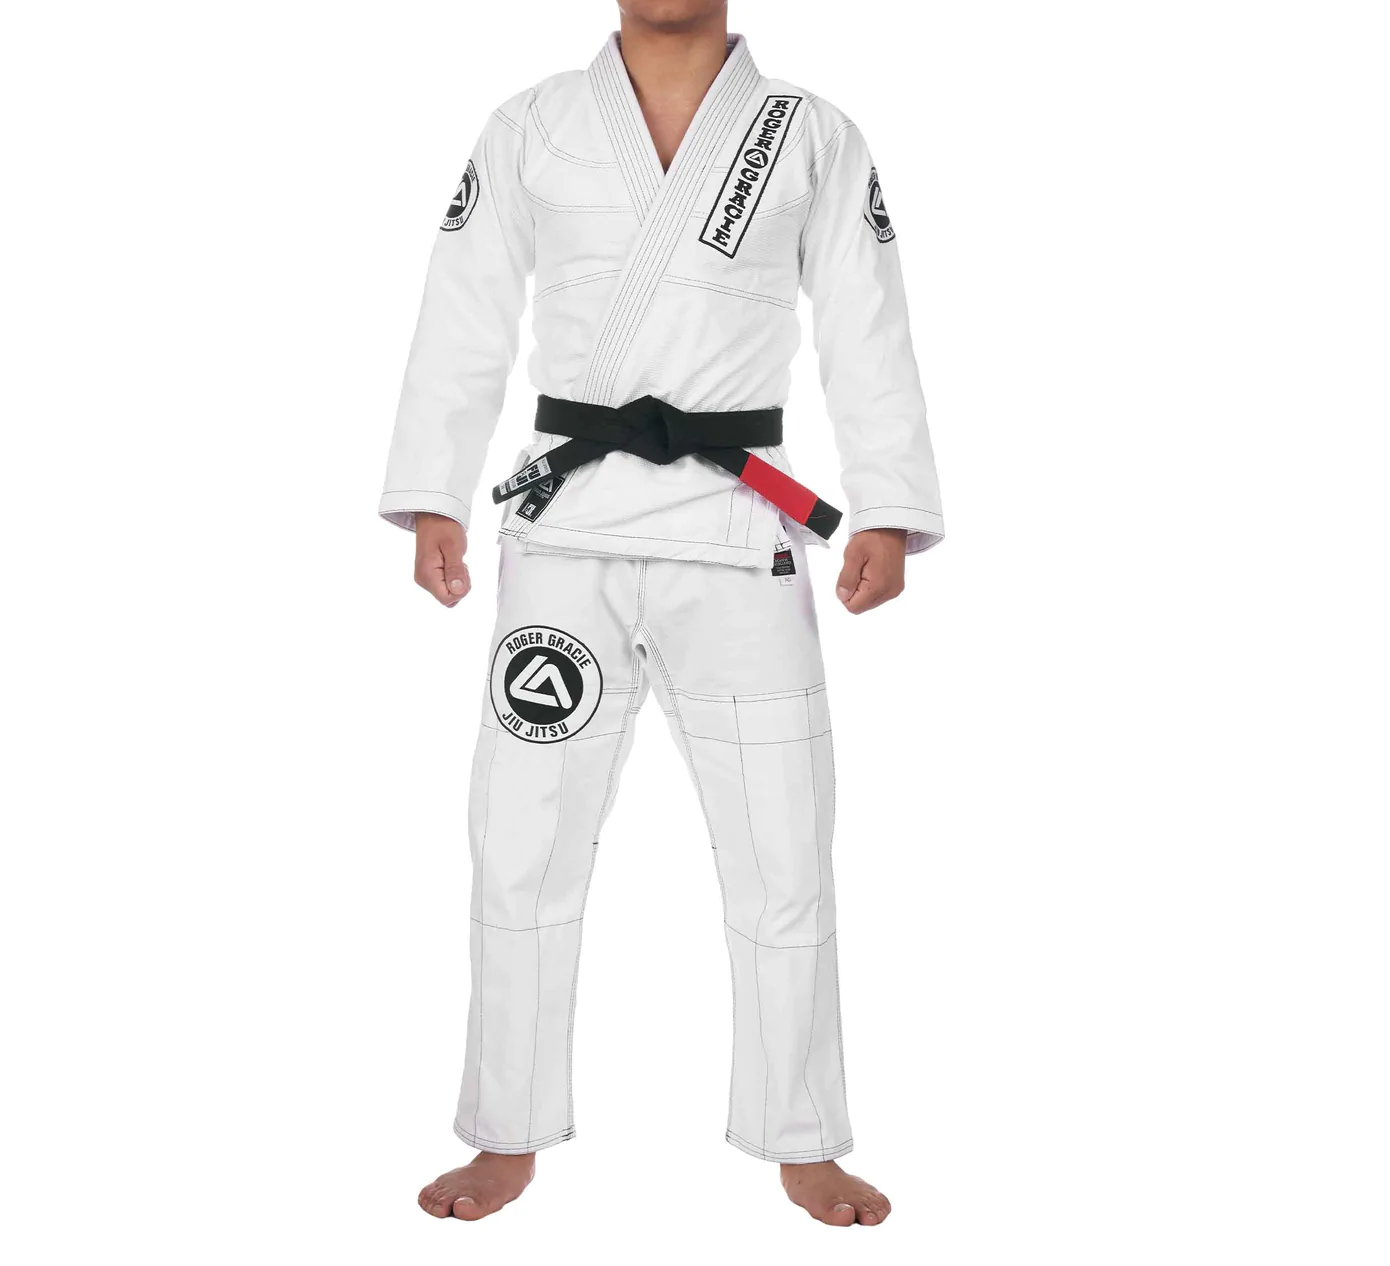 Front view of a Roger Gracie competition cut Gi